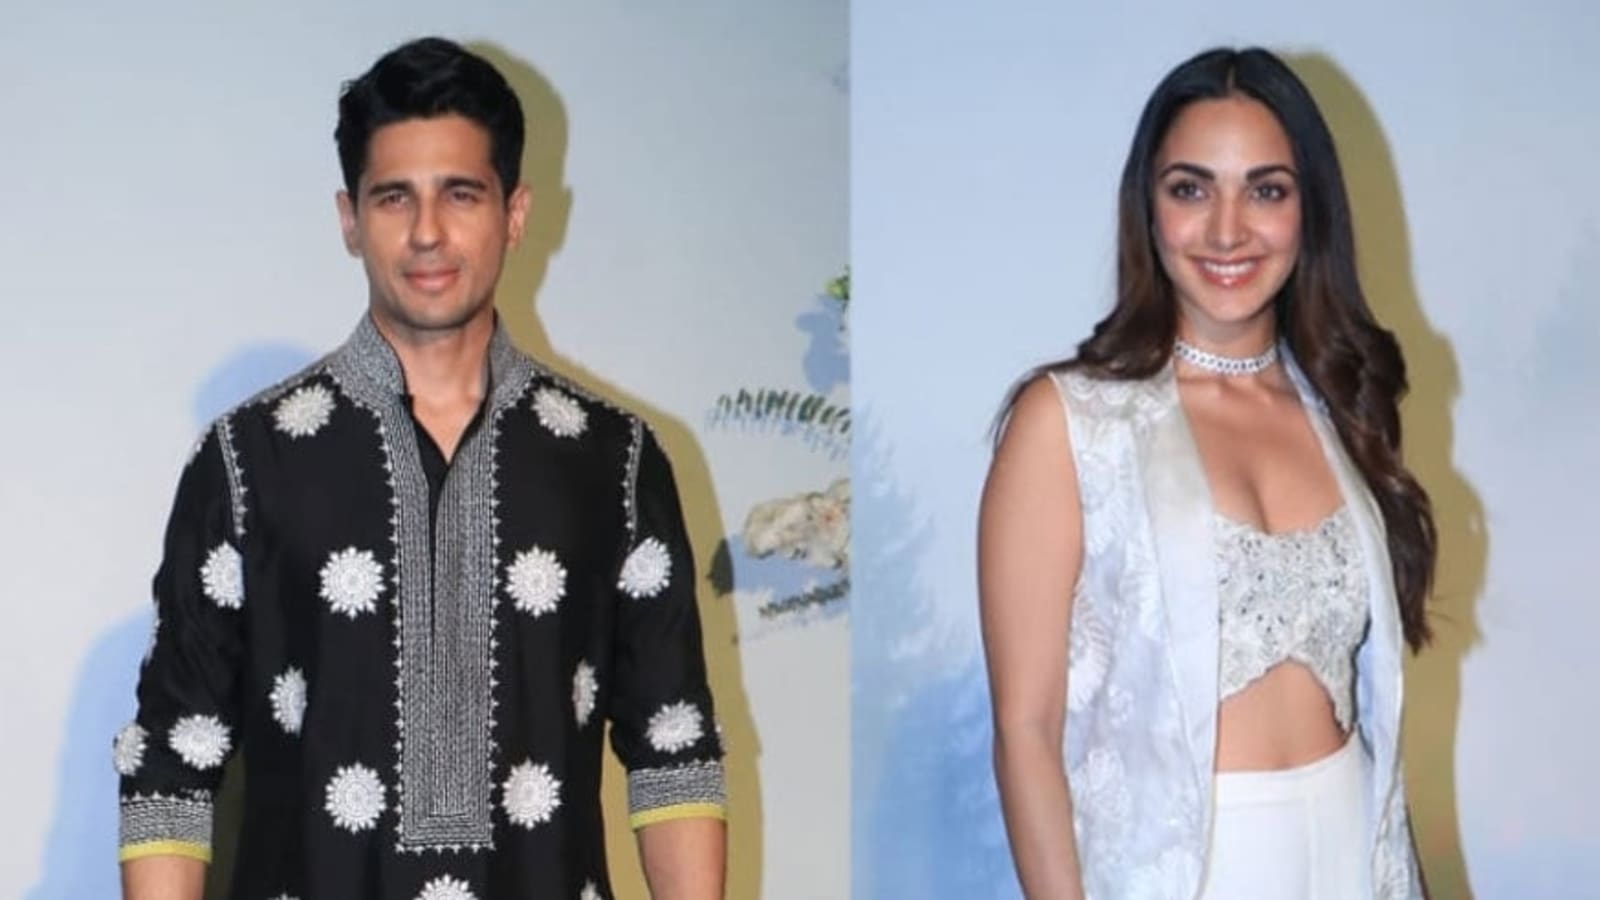 Kiara Advani reacts to link-up rumours with Sidharth Malhotra: ‘Where is this coming from, who is this source?’